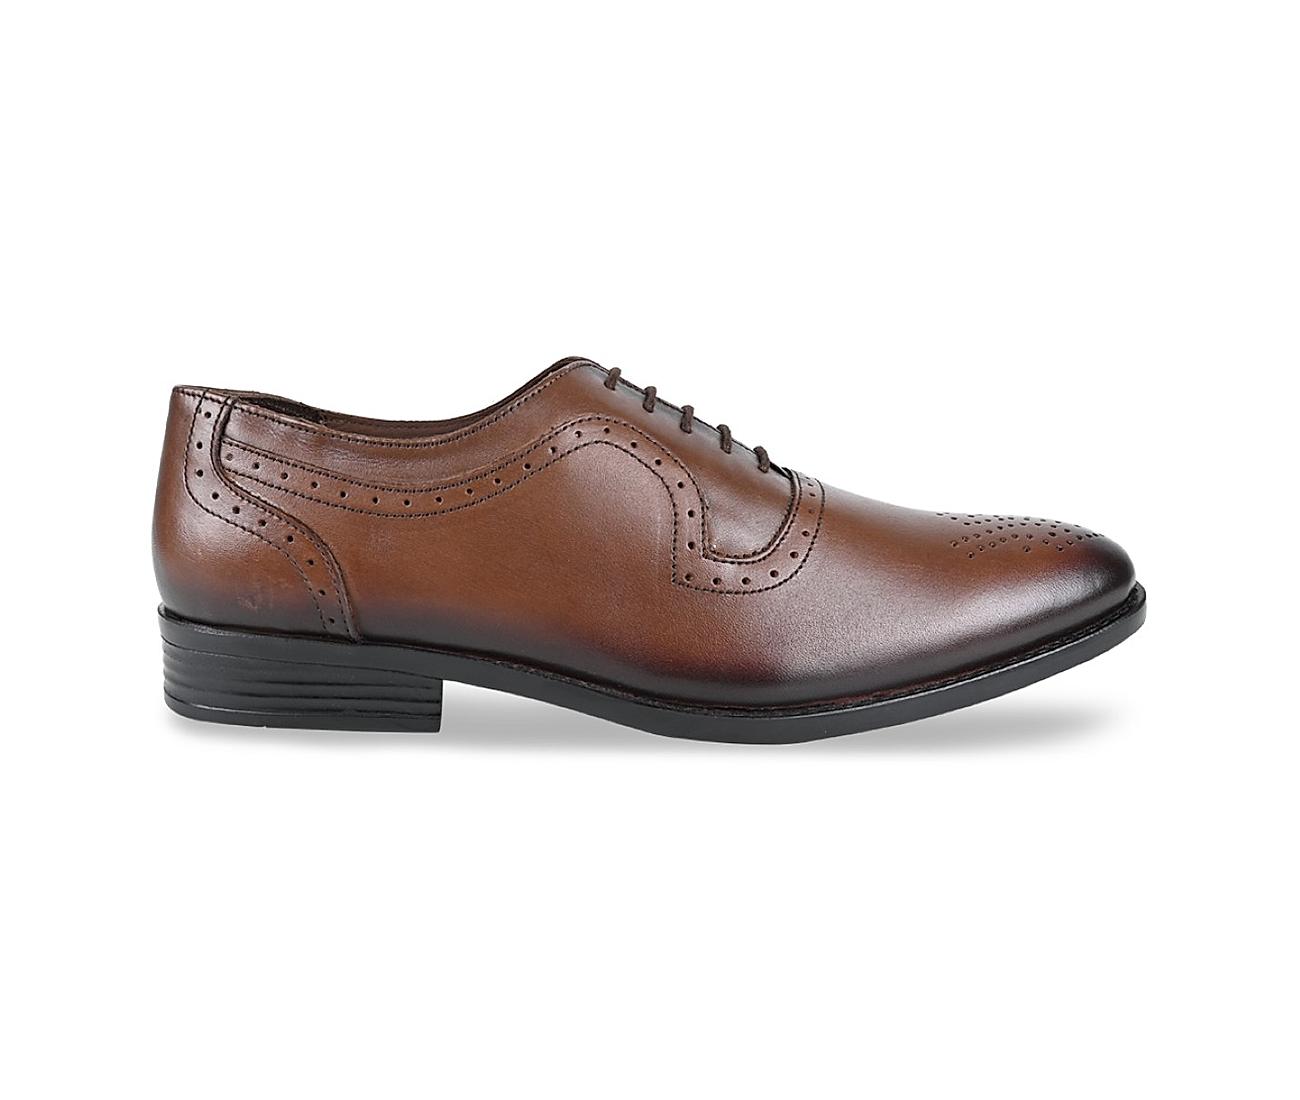 ABOUT SHOES - REGAL IMPERIAL GRADE LONGWING DERBY MADE IN... | فيسبوك-happymobile.vn